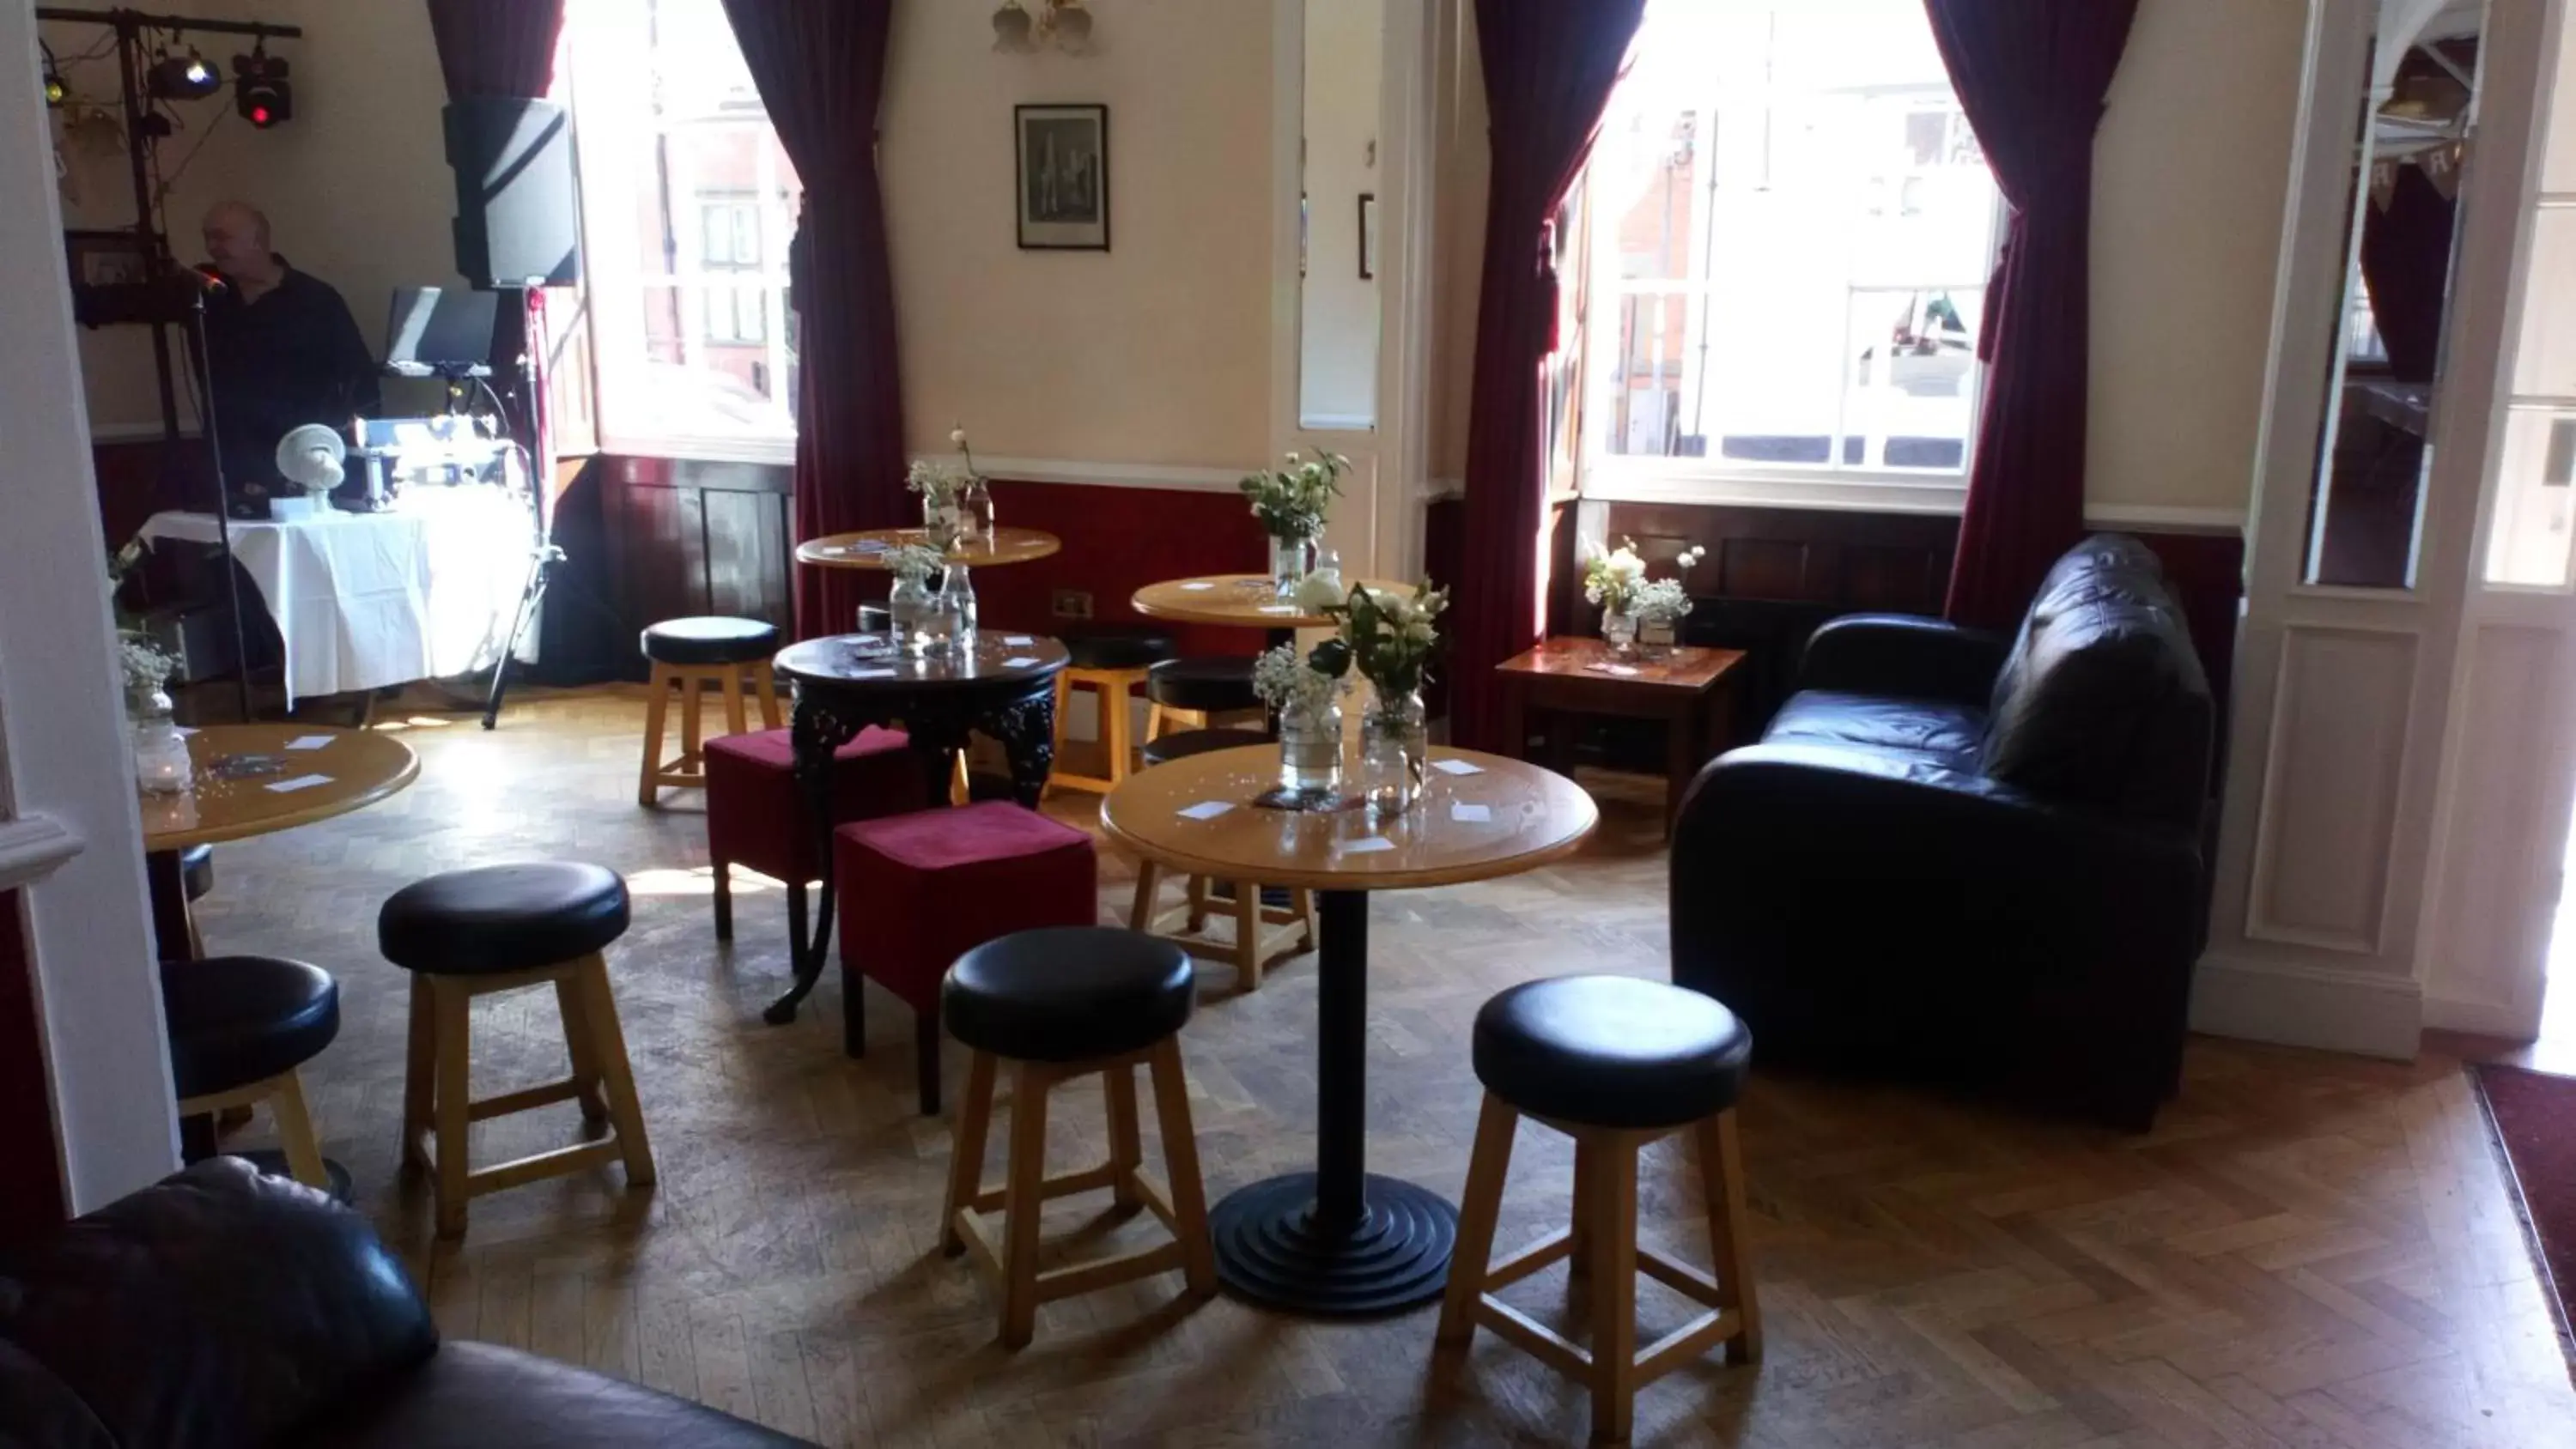 Seating Area in The Londesborough Arms bar with en-suite rooms